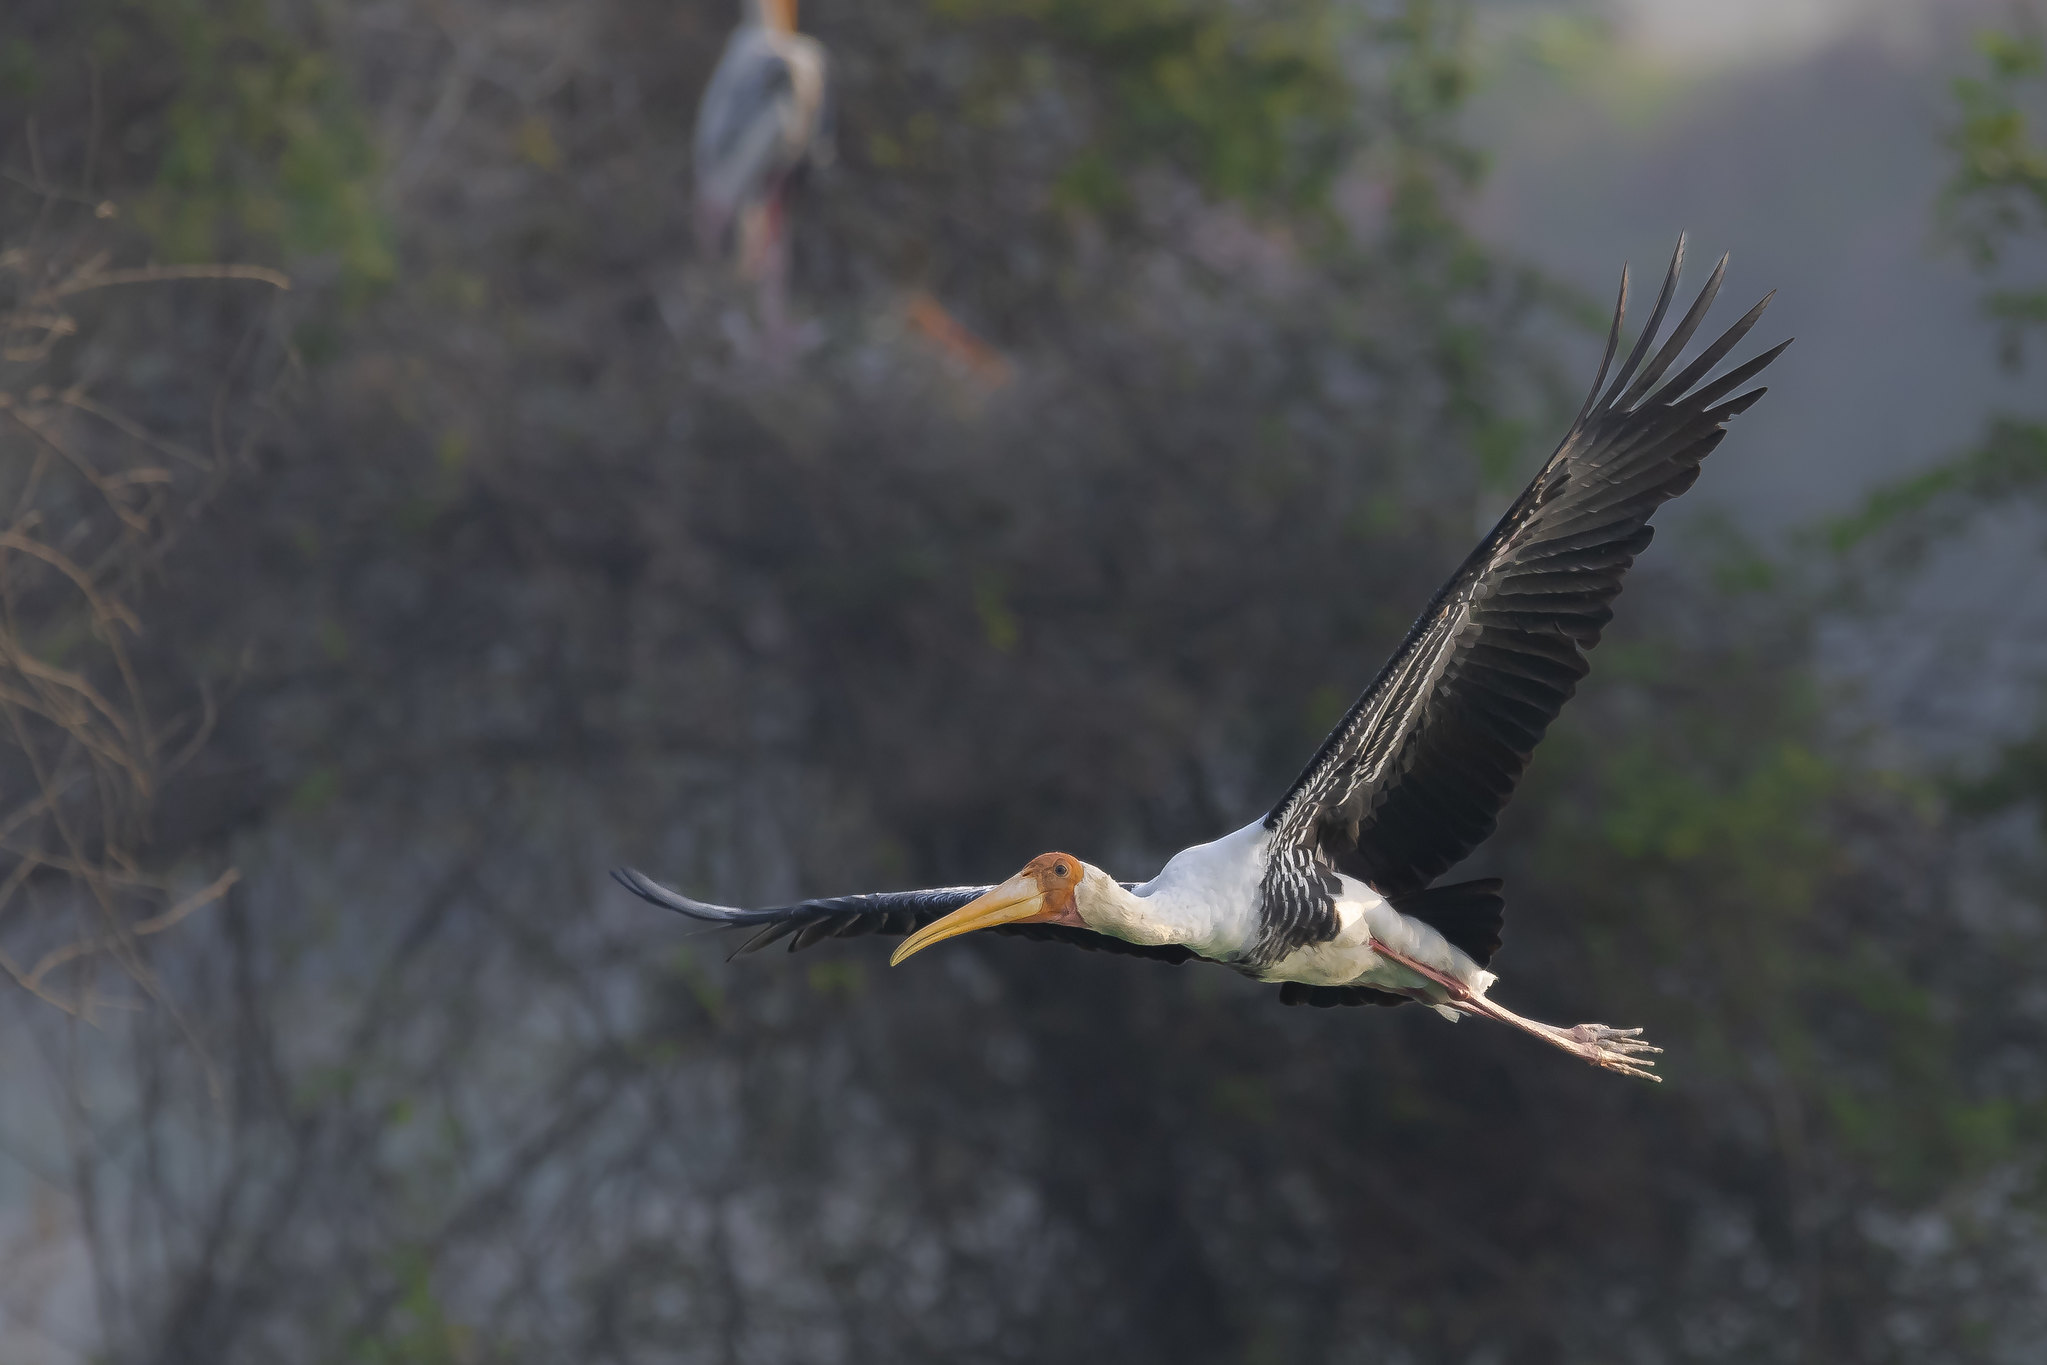 The painted stork...